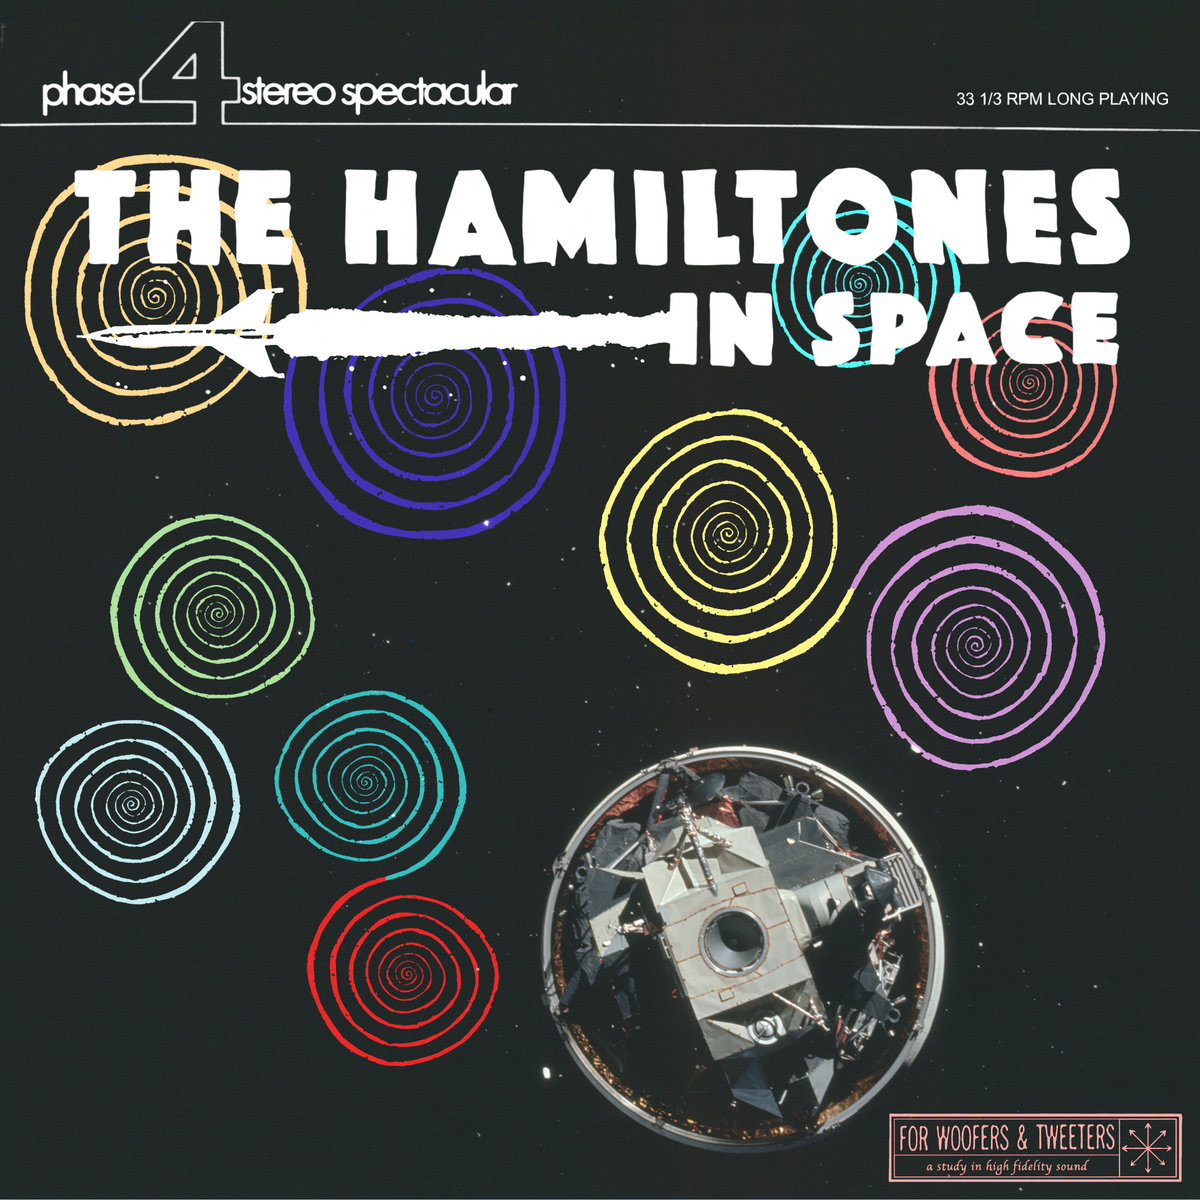 New Music: ‘Space Race’ by The Hamiltones